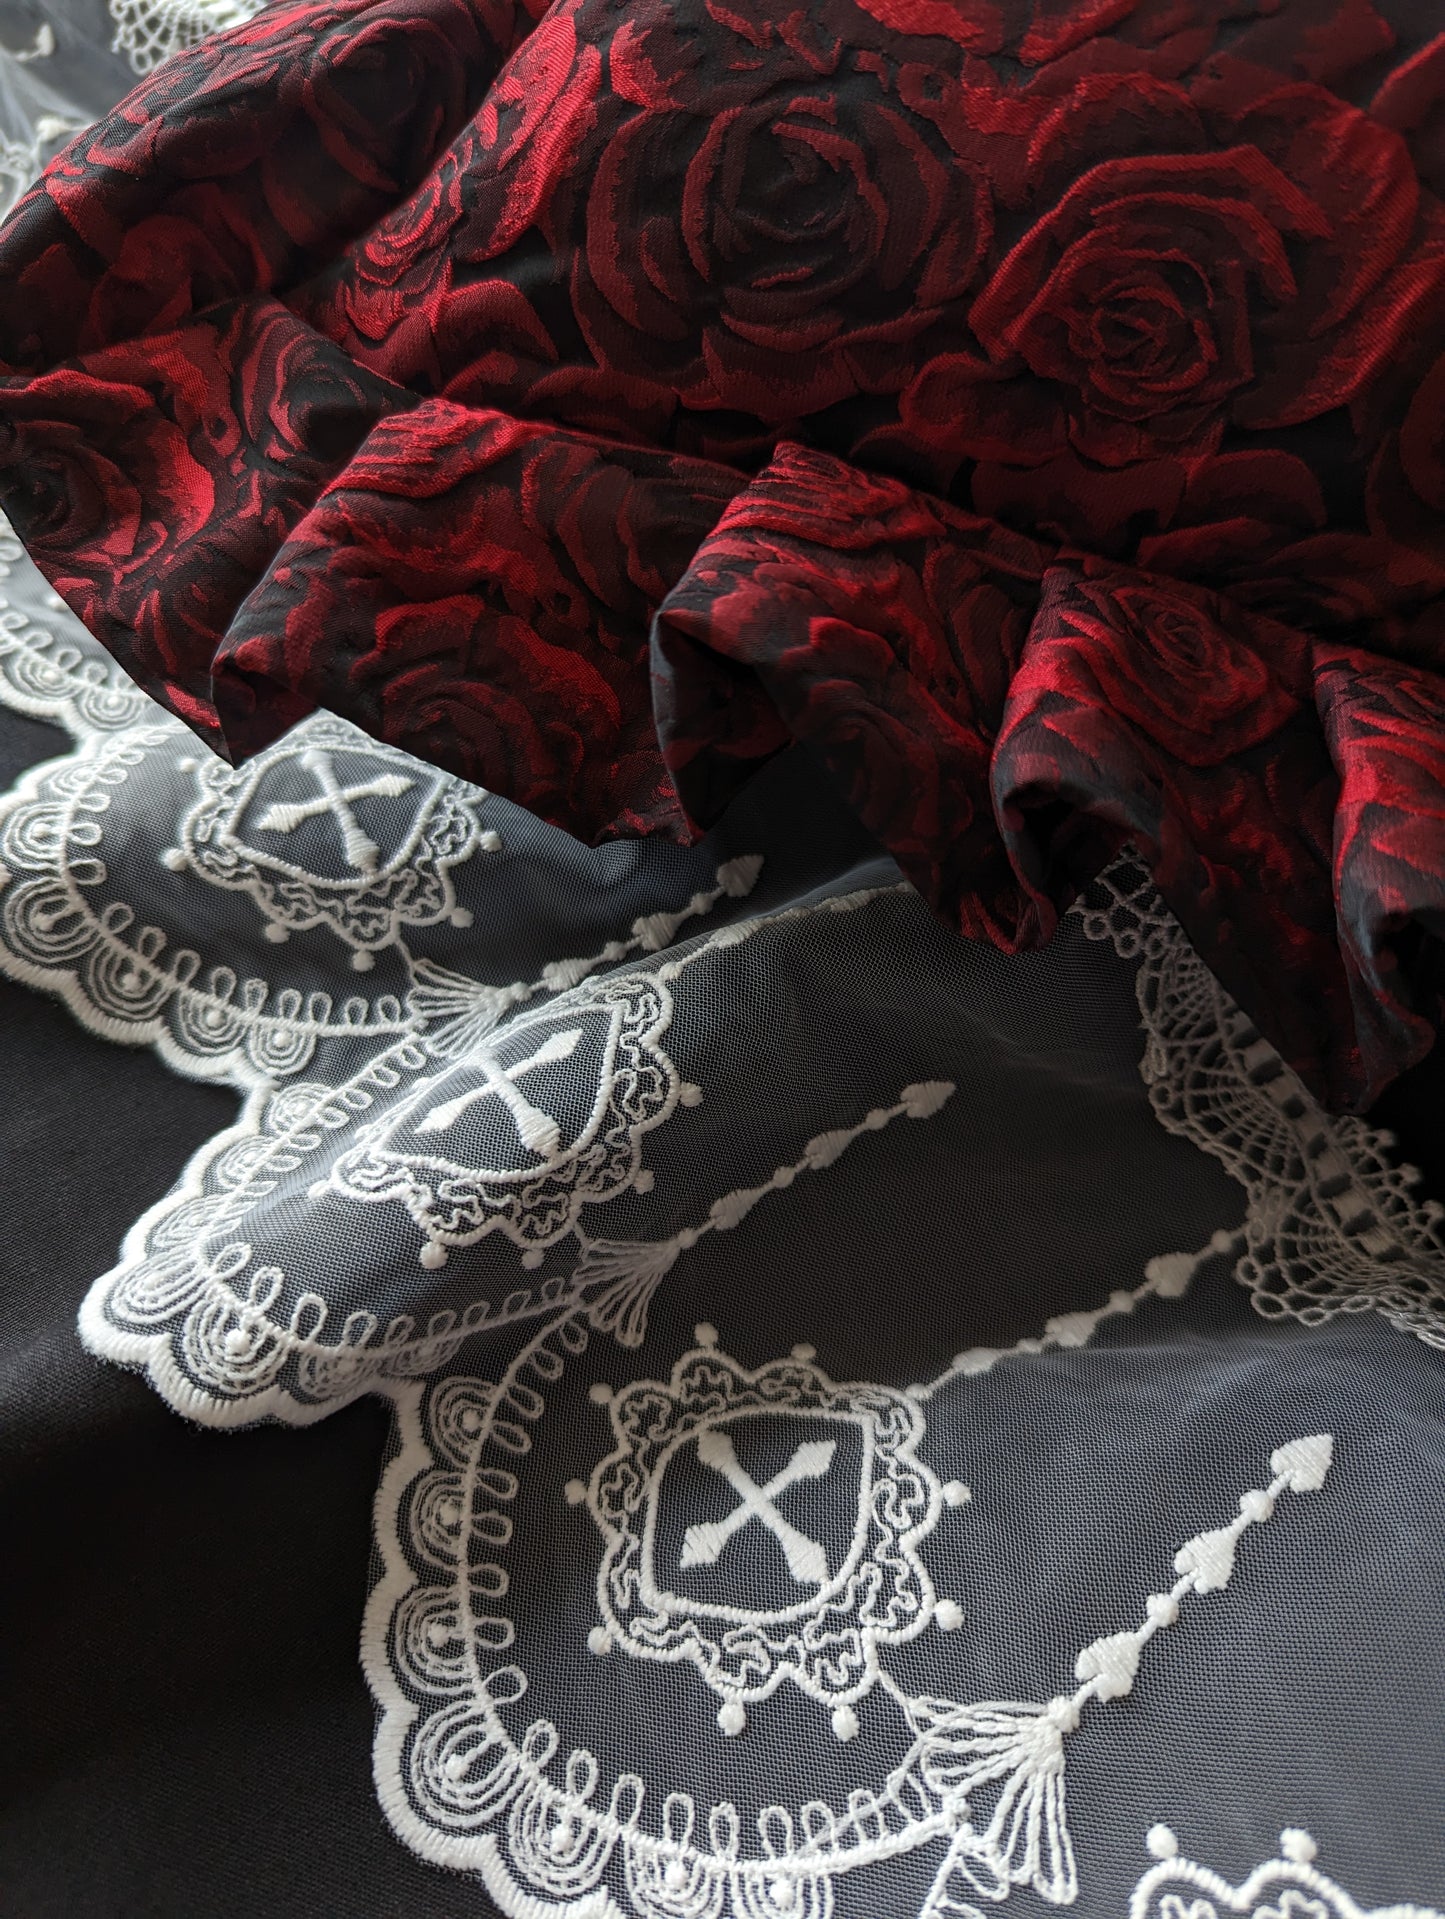 Close up details of our Mourning Parlour lace, showing it's pretty scalloped edge and cross details. A red ruffled cushion is visible above.